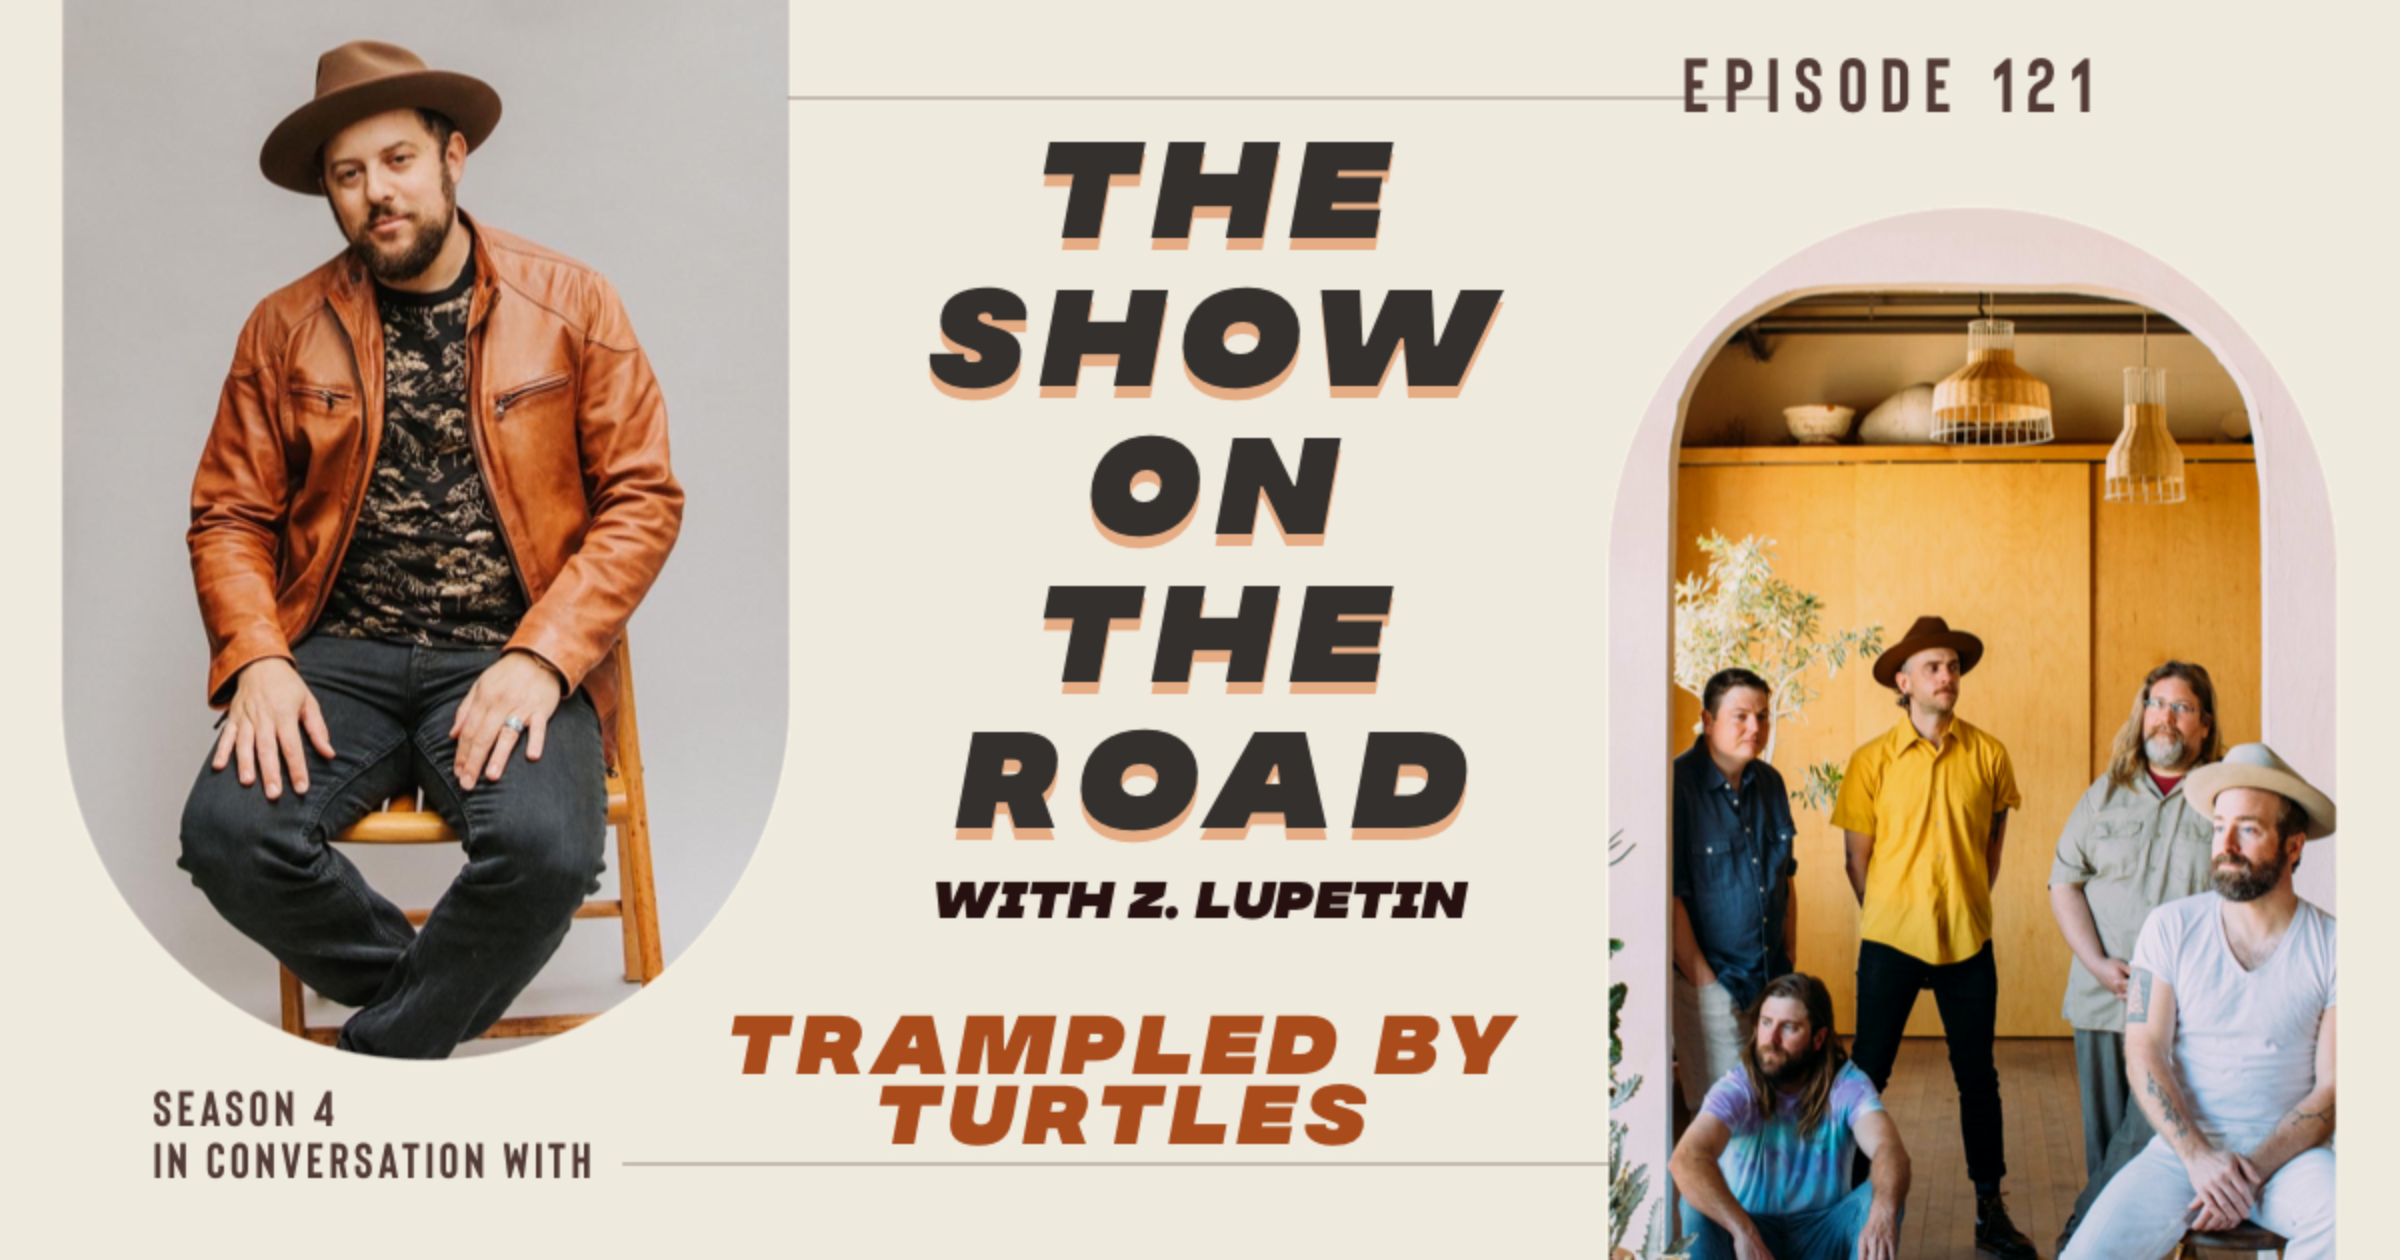 The Show On The Road - Trampled by Turtles